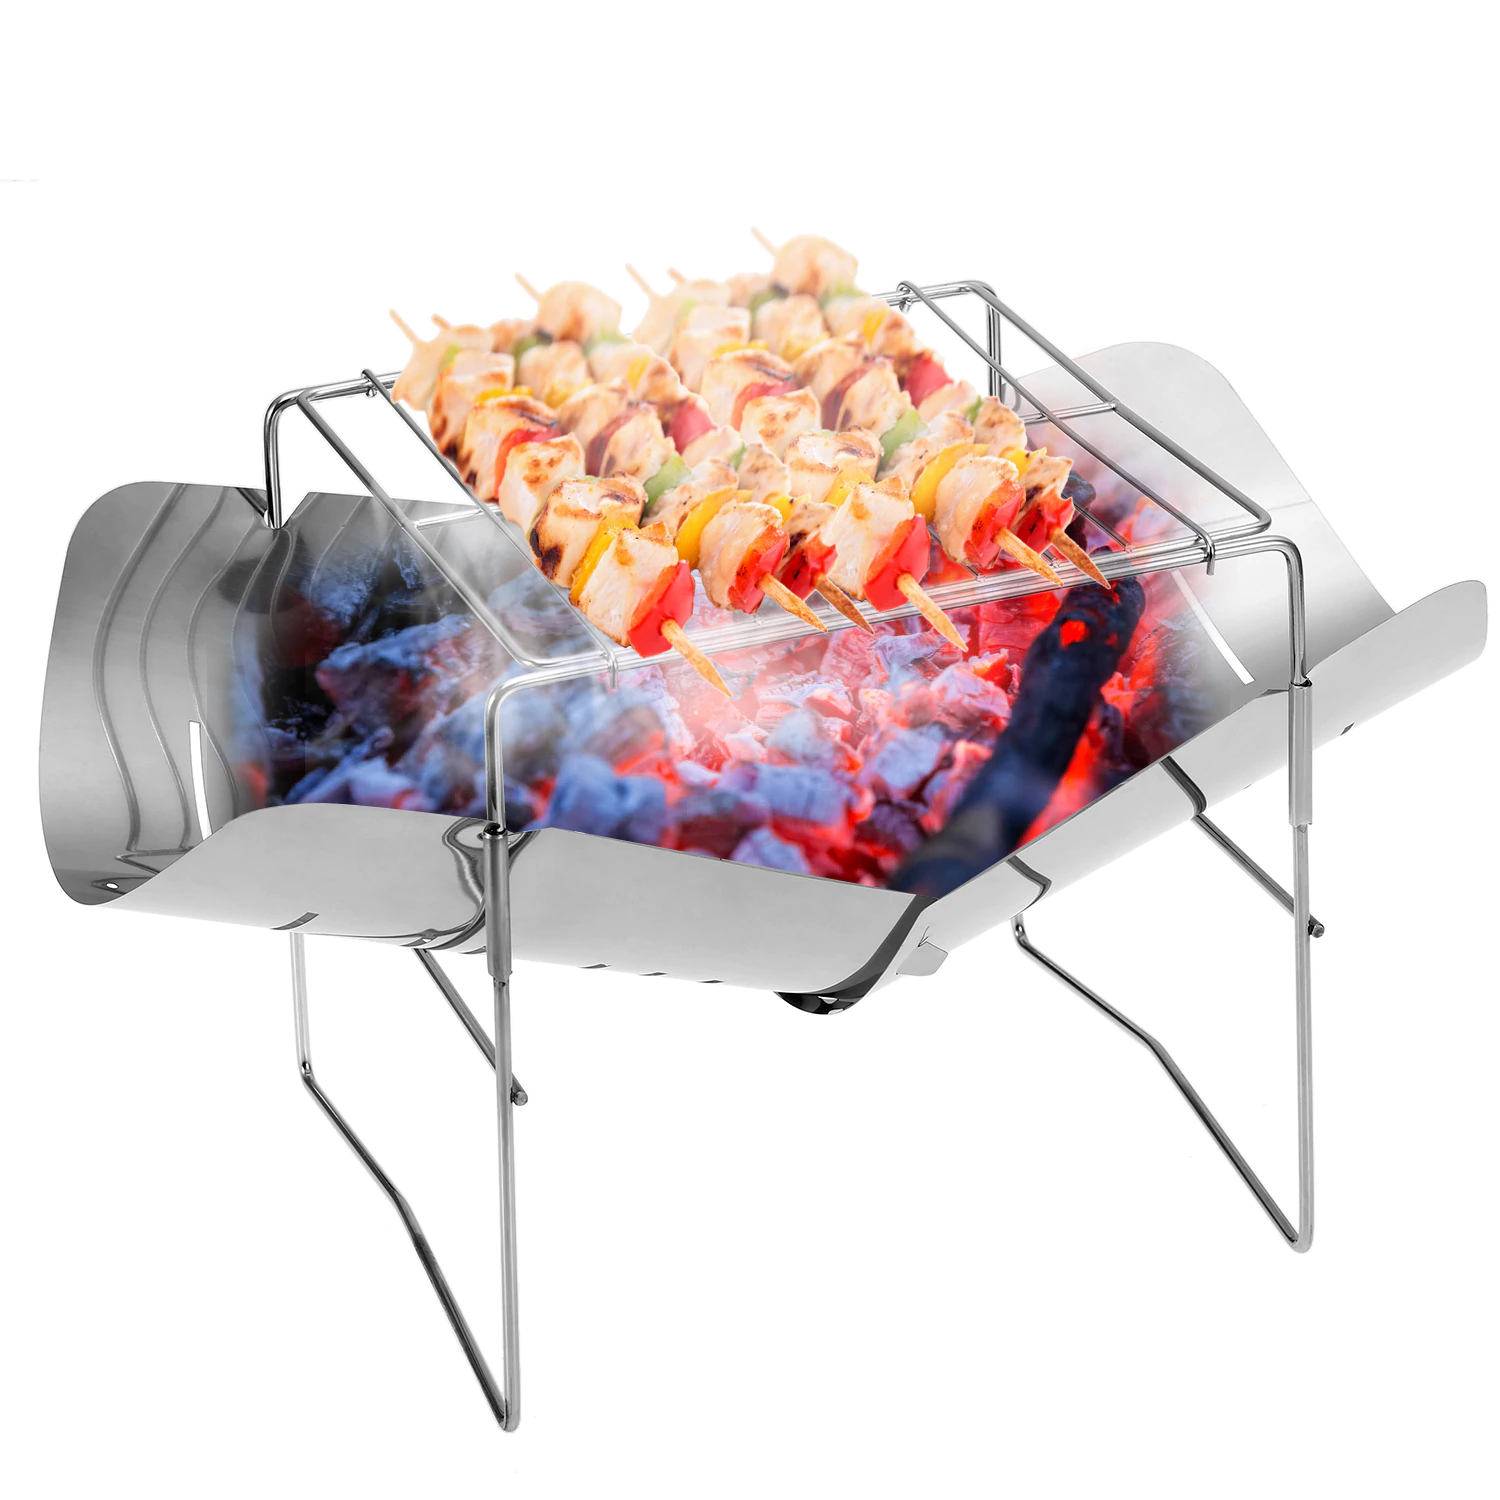 Ultra-light Stainless Steel Folding Fire Pit High Temperature Resistance Camping Barbecue Wood Stove